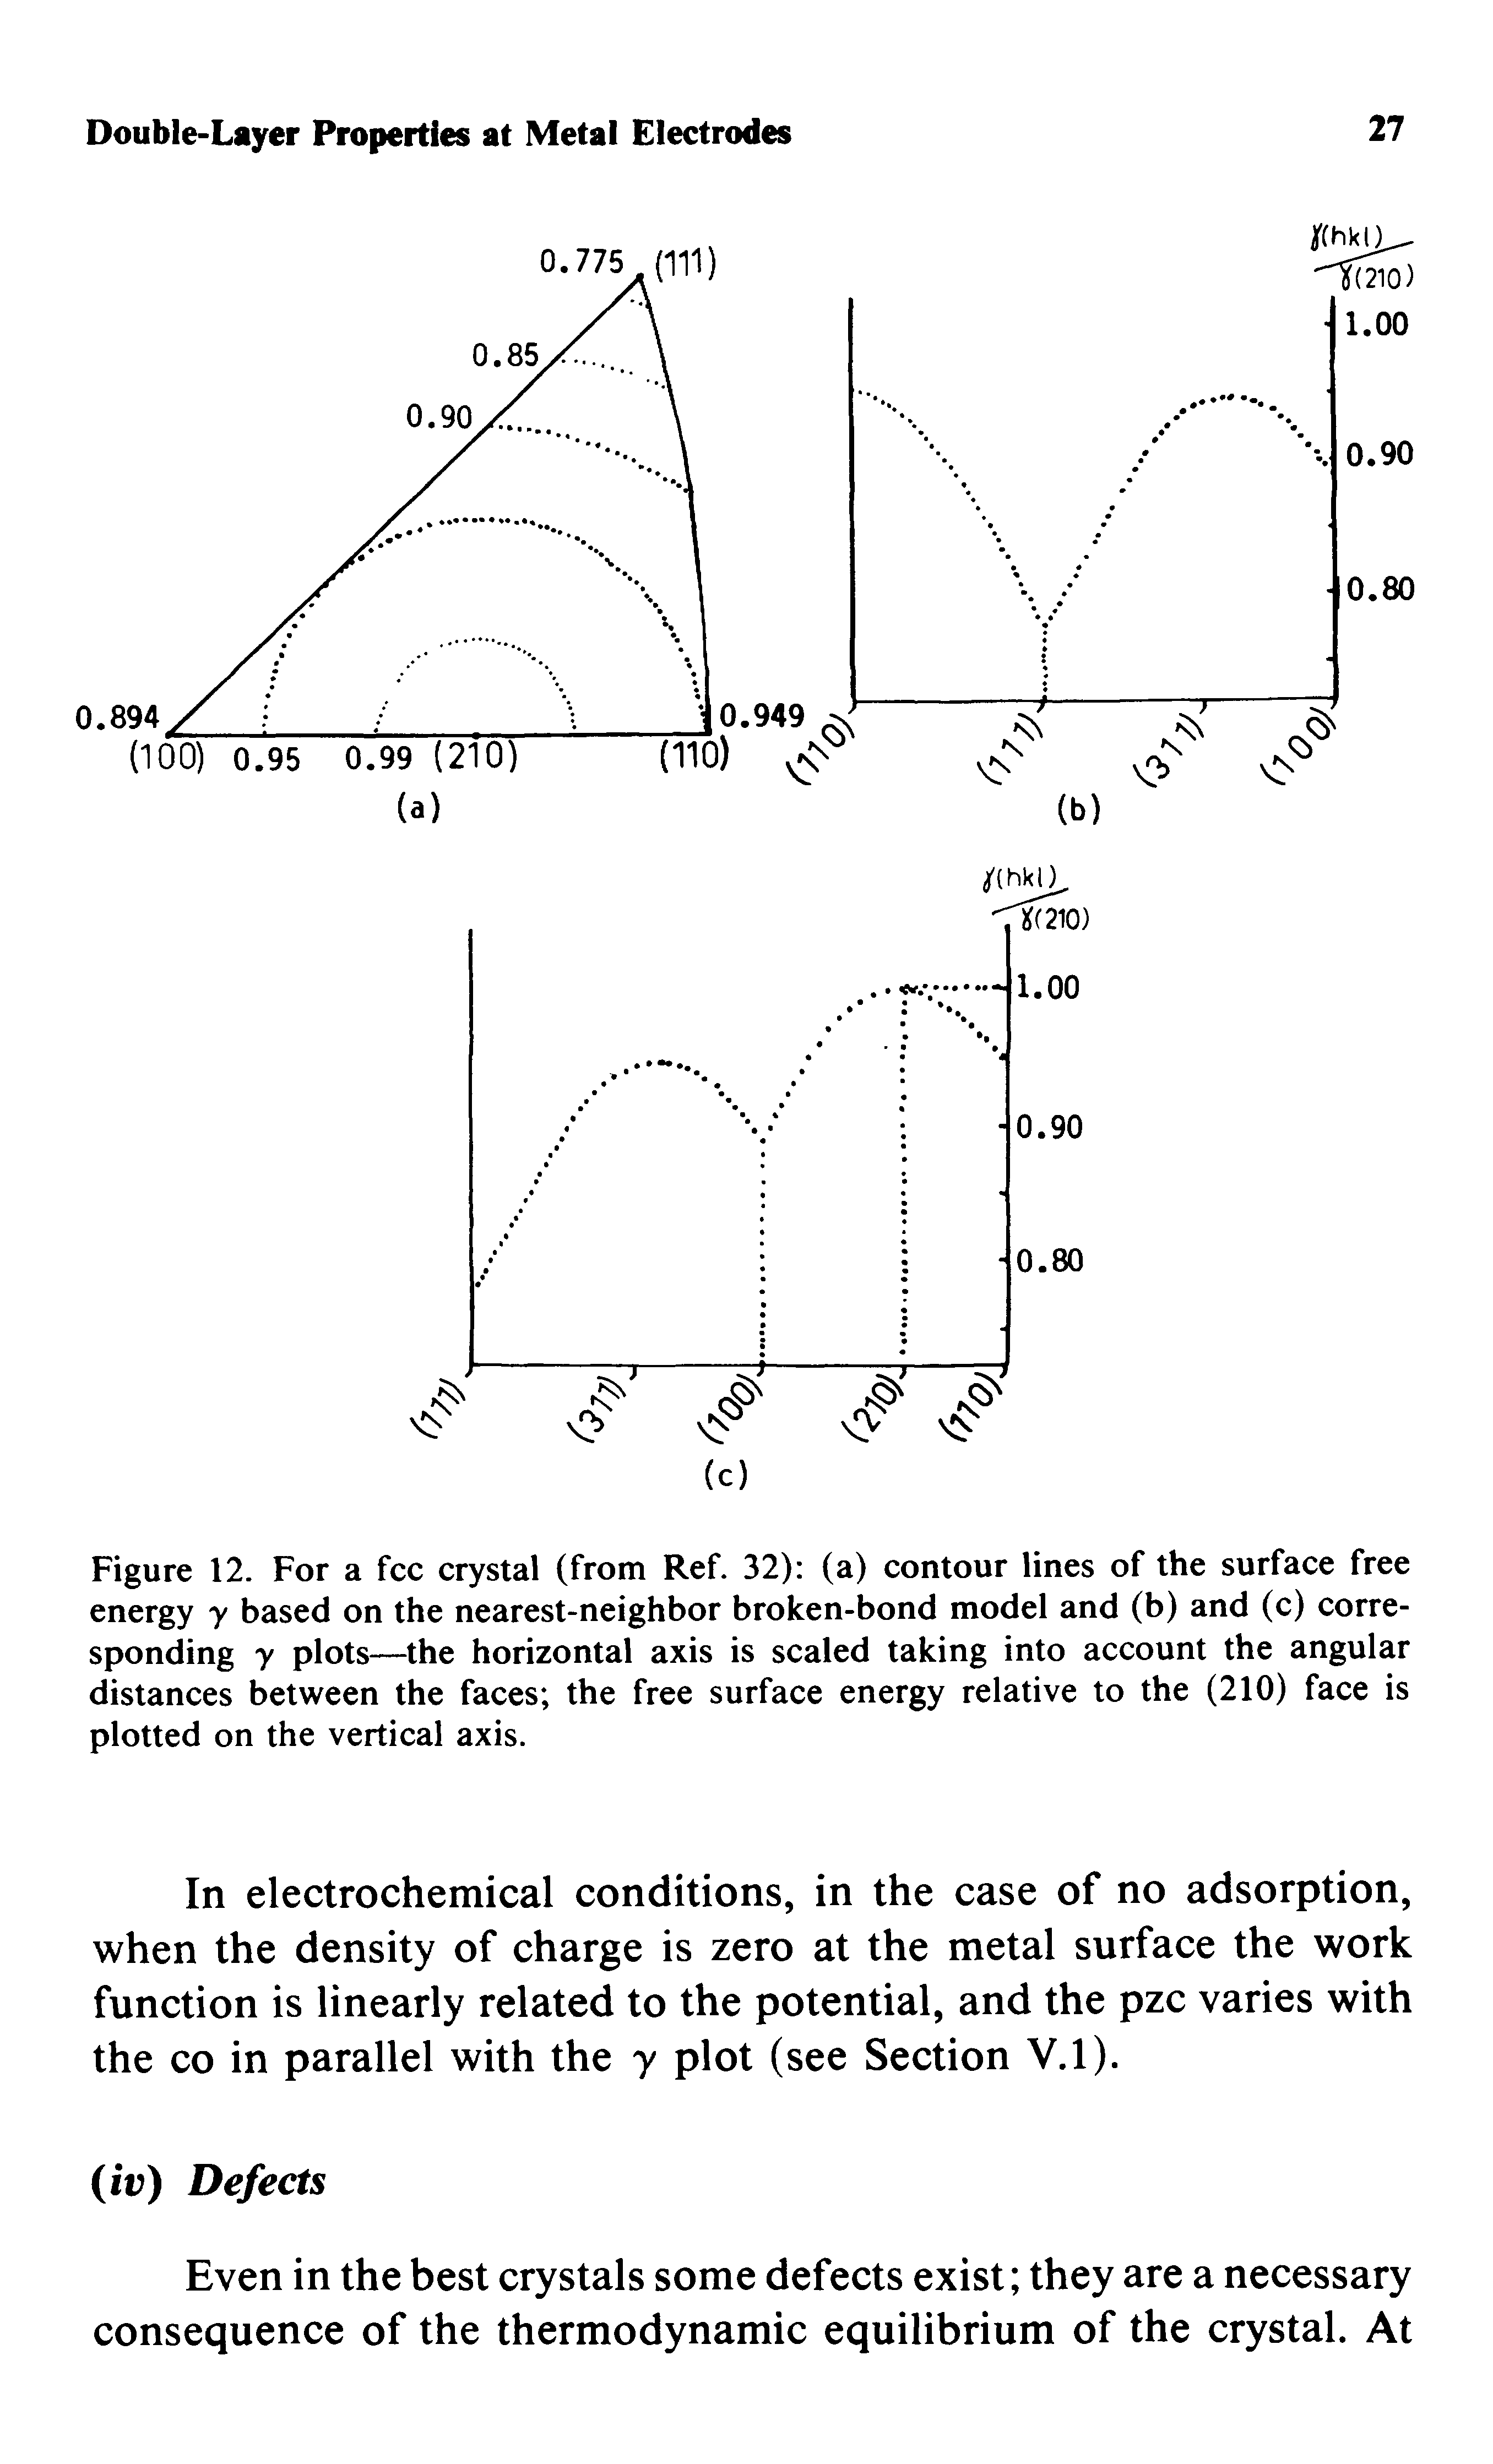 Figure 12. For a fee erystal (from Ref. 32) (a) eontour lines of the surfaee free energy y based on the nearest-neighbor broken-bond model and (b) and (e) eorre-sponding y plots—the horizontal axis is sealed taking into aeeount the angular distanees between the faees the free surfaee energy relative to the (210) faee is plotted on the vertieal axis.